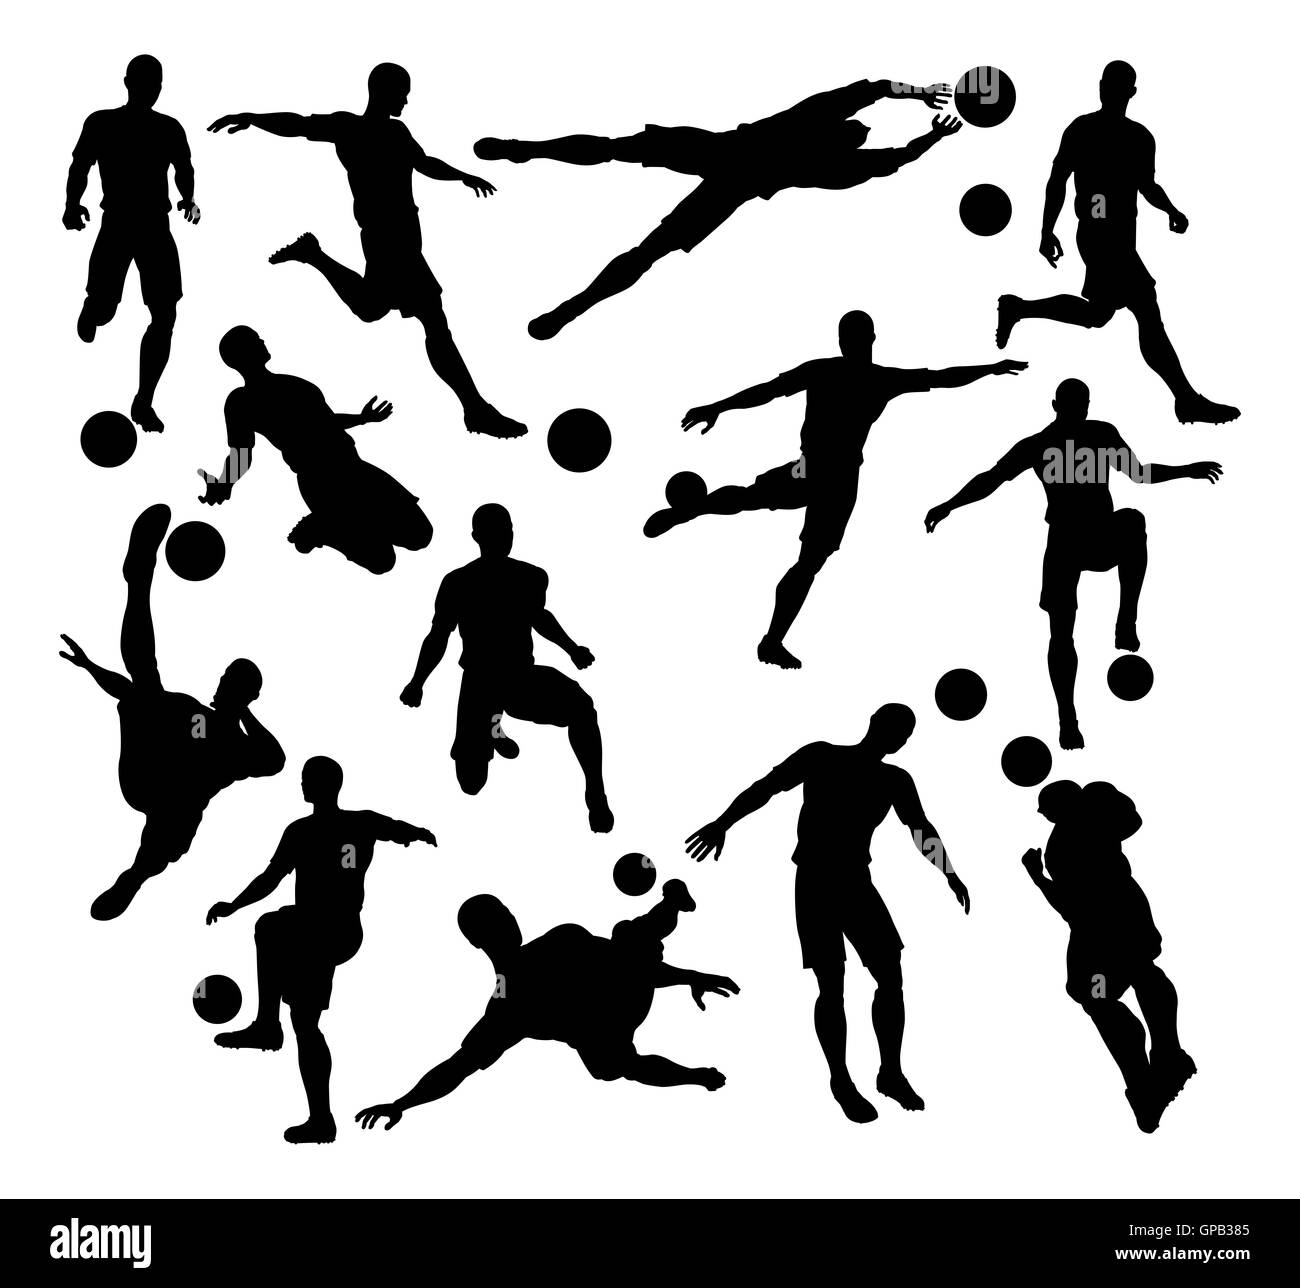 A set of Football Soccer Player Silhouettes in lots of different poses Stock Photo